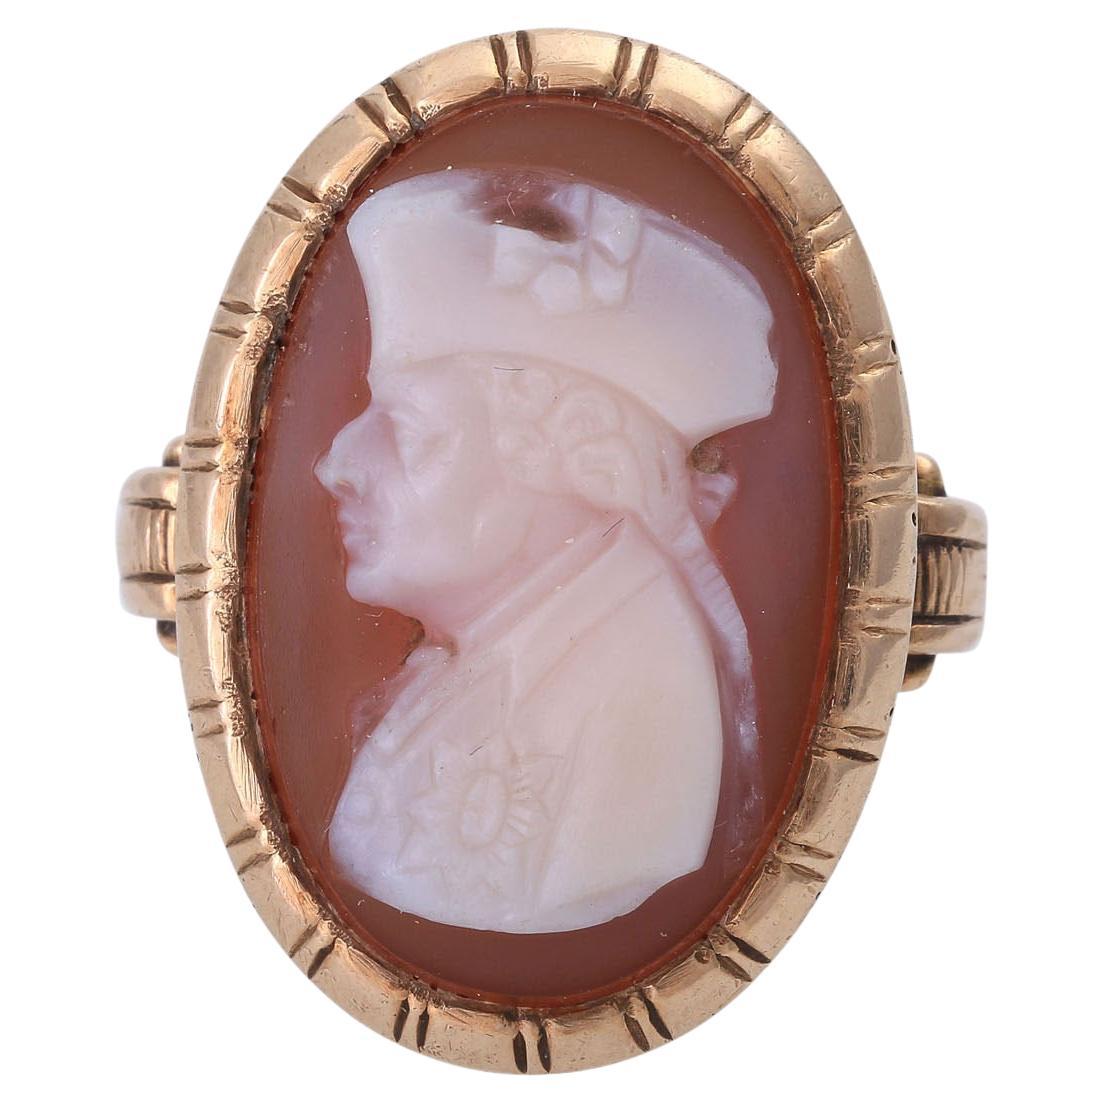 Ring with a layered stone cameo "Frederick the Great" in profile, For Sale